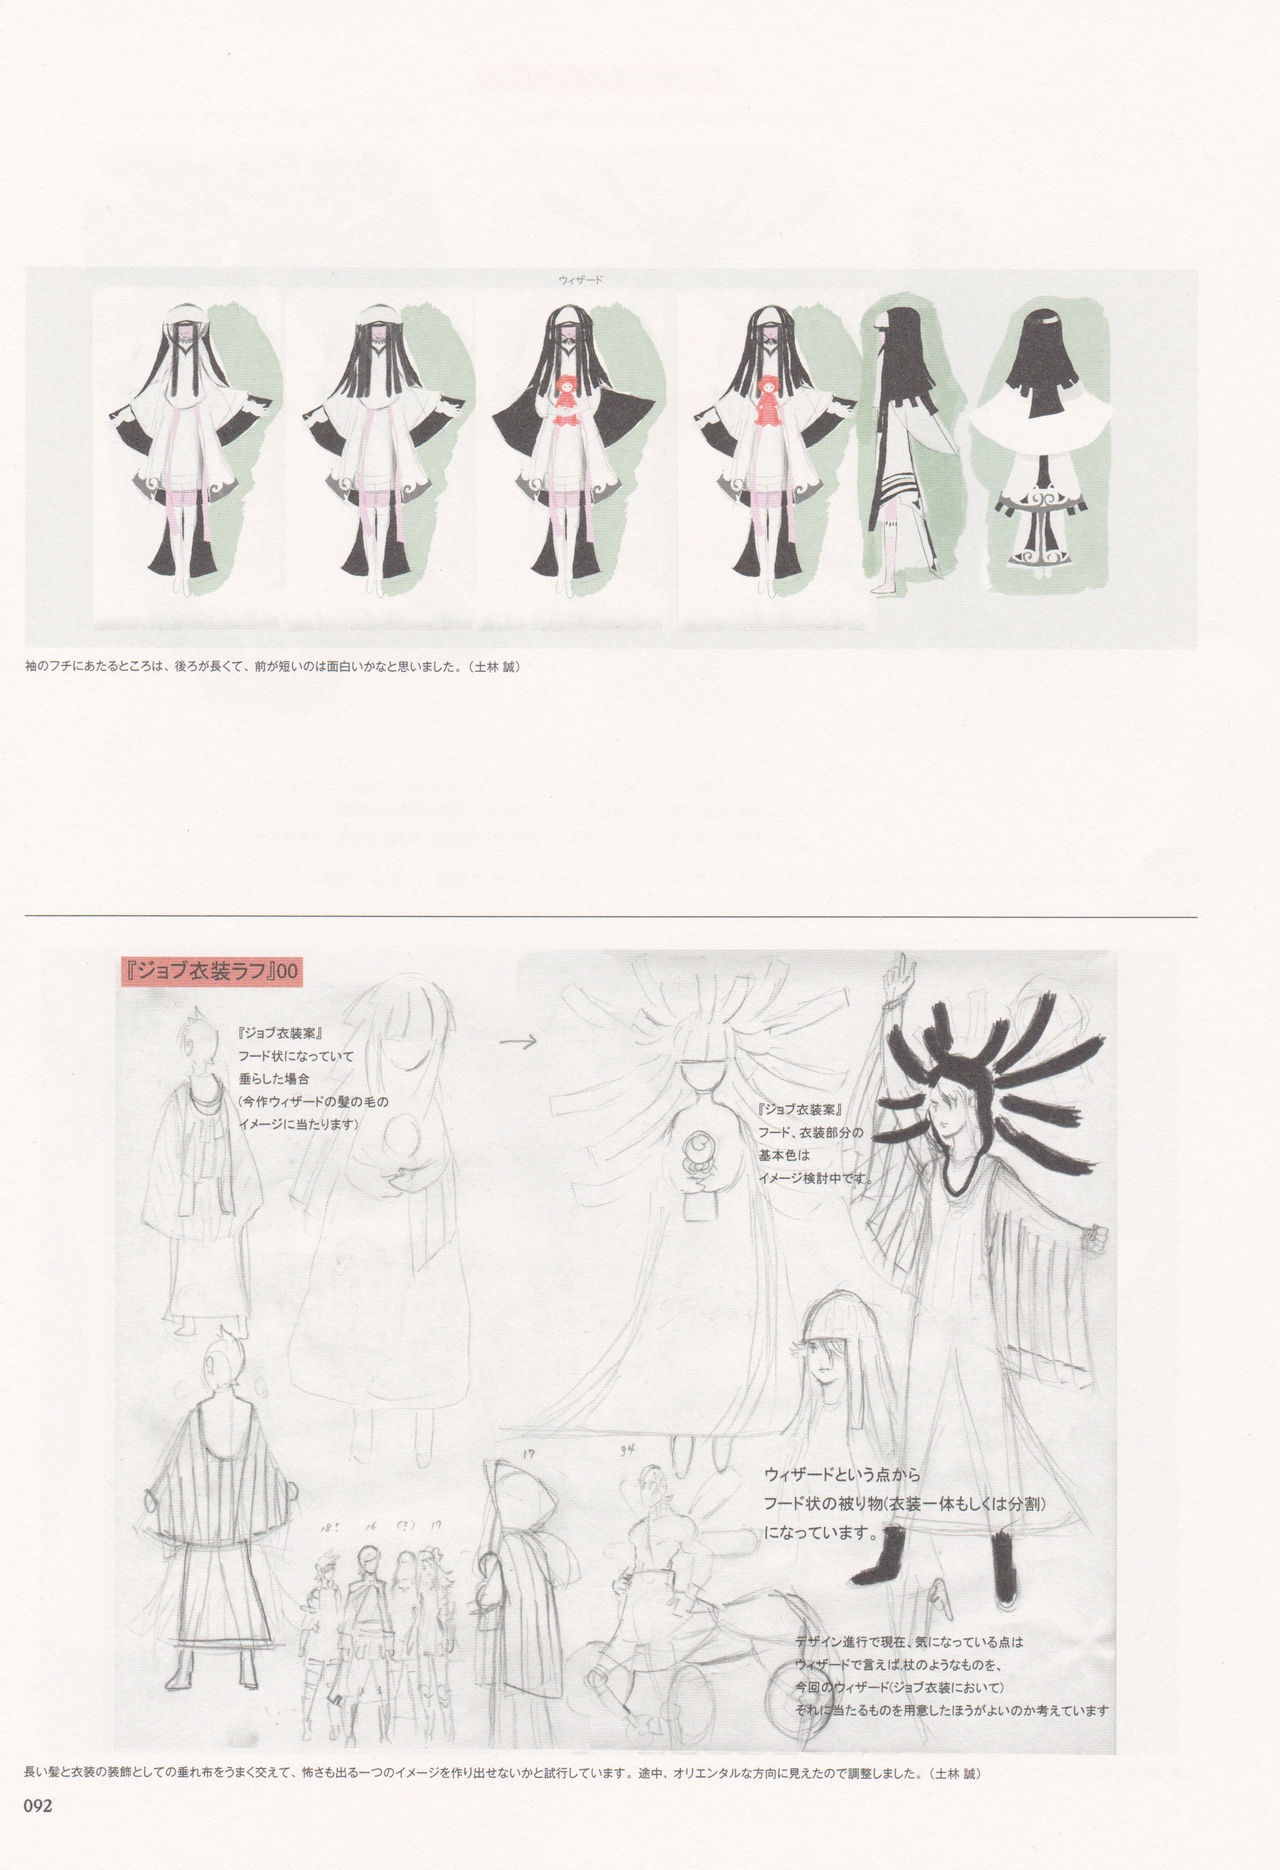 Bravely Second - End Layer - Design Works THE ART OF BRAVELY 2013-2015 92